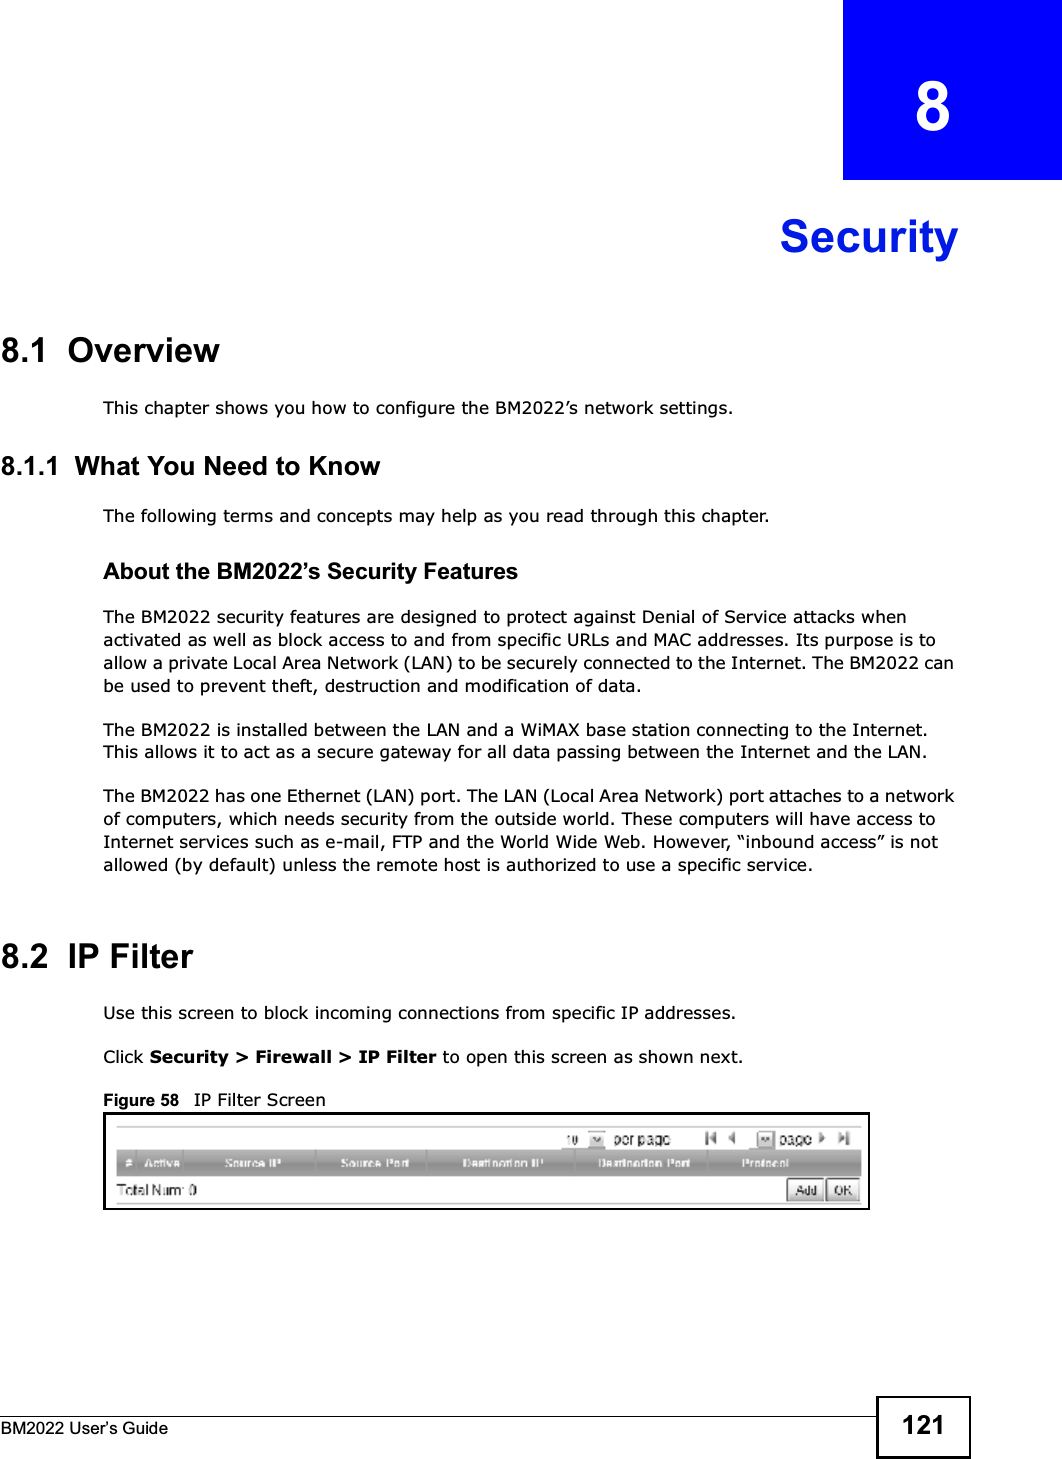 BM2022 Users Guide 121CHAPTER   8Security8.1  OverviewThis chapter shows you how to configure the BM2022s network settings.8.1.1  What You Need to KnowThe following terms and concepts may help as you read through this chapter.About the BM2022s Security FeaturesThe BM2022 security features are designed to protect against Denial of Service attacks when activated as well as block access to and from specific URLs and MAC addresses. Its purpose is to allow a private Local Area Network (LAN) to be securely connected to the Internet. The BM2022 can be used to prevent theft, destruction and modification of data. The BM2022 is installed between the LAN and a WiMAX base station connecting to the Internet. This allows it to act as a secure gateway for all data passing between the Internet and the LAN.The BM2022 has one Ethernet (LAN) port. The LAN (Local Area Network) port attaches to a network of computers, which needs security from the outside world. These computers will have access to Internet services such as e-mail, FTP and the World Wide Web. However, inbound access is not allowed (by default) unless the remote host is authorized to use a specific service.8.2  IP FilterUse this screen to block incoming connections from specific IP addresses.Click Security &gt; Firewall &gt; IP Filter to open this screen as shown next.Figure 58   IP Filter Screen